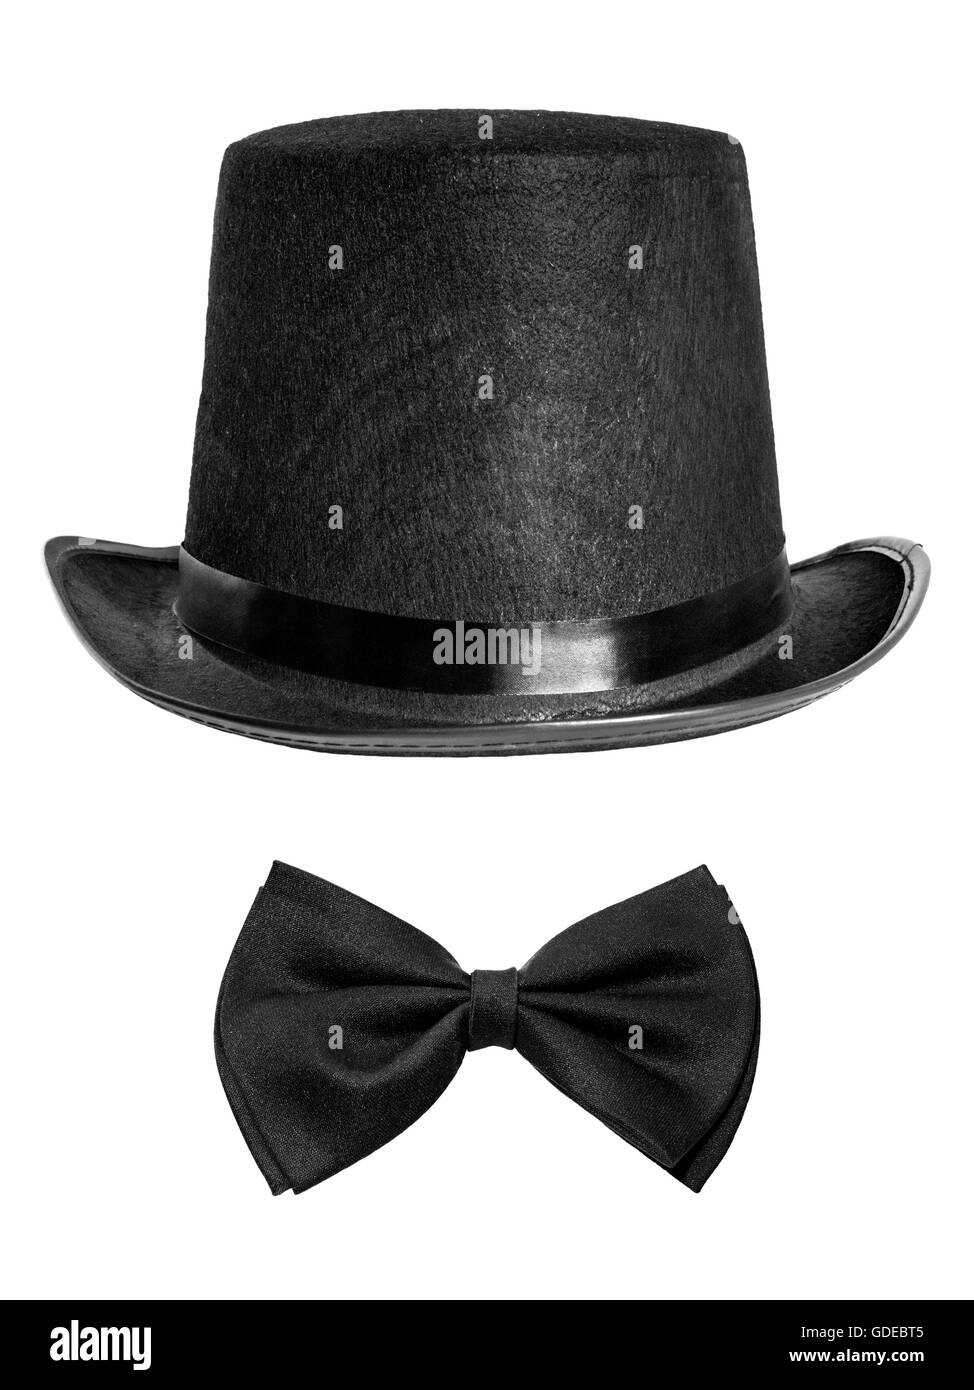 black felt hat and bow tie isolated on white background. front view Stock Photo